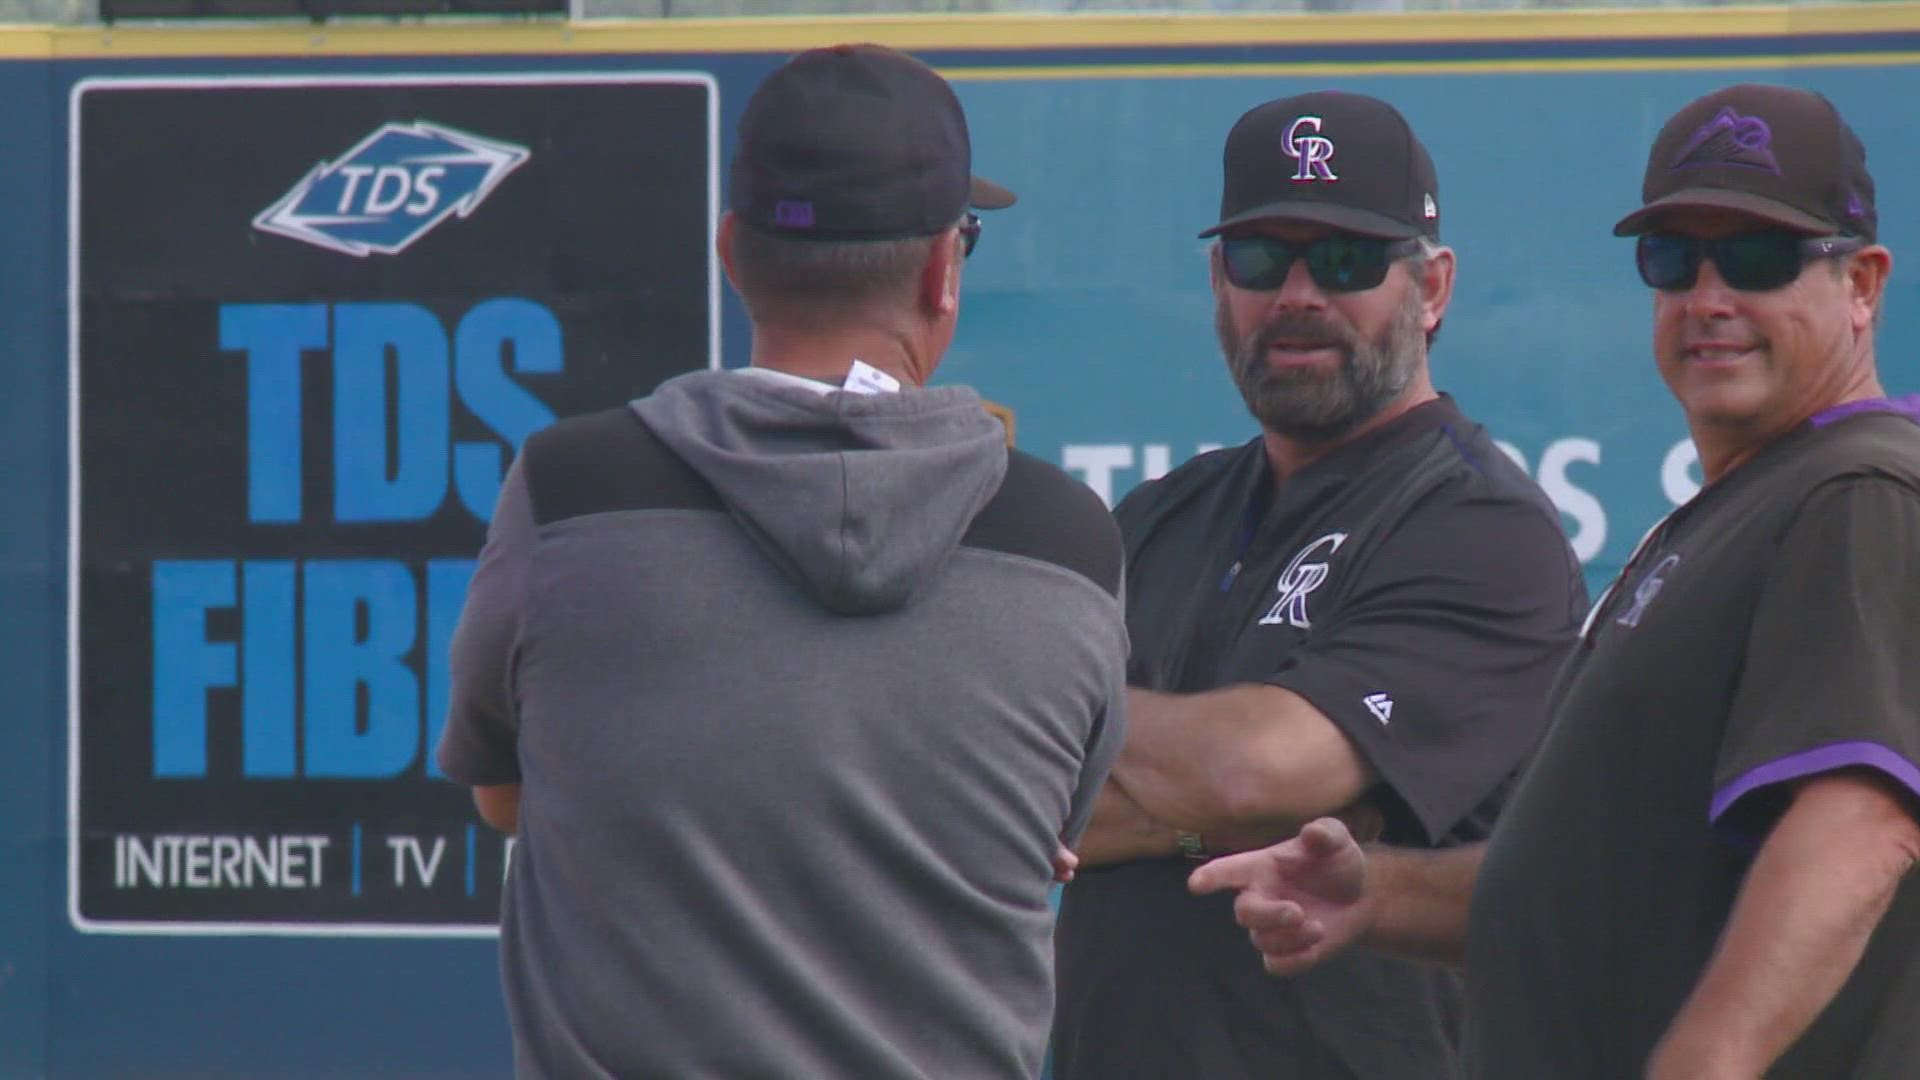 Rockies' Todd Helton proud of staying with only one team – The